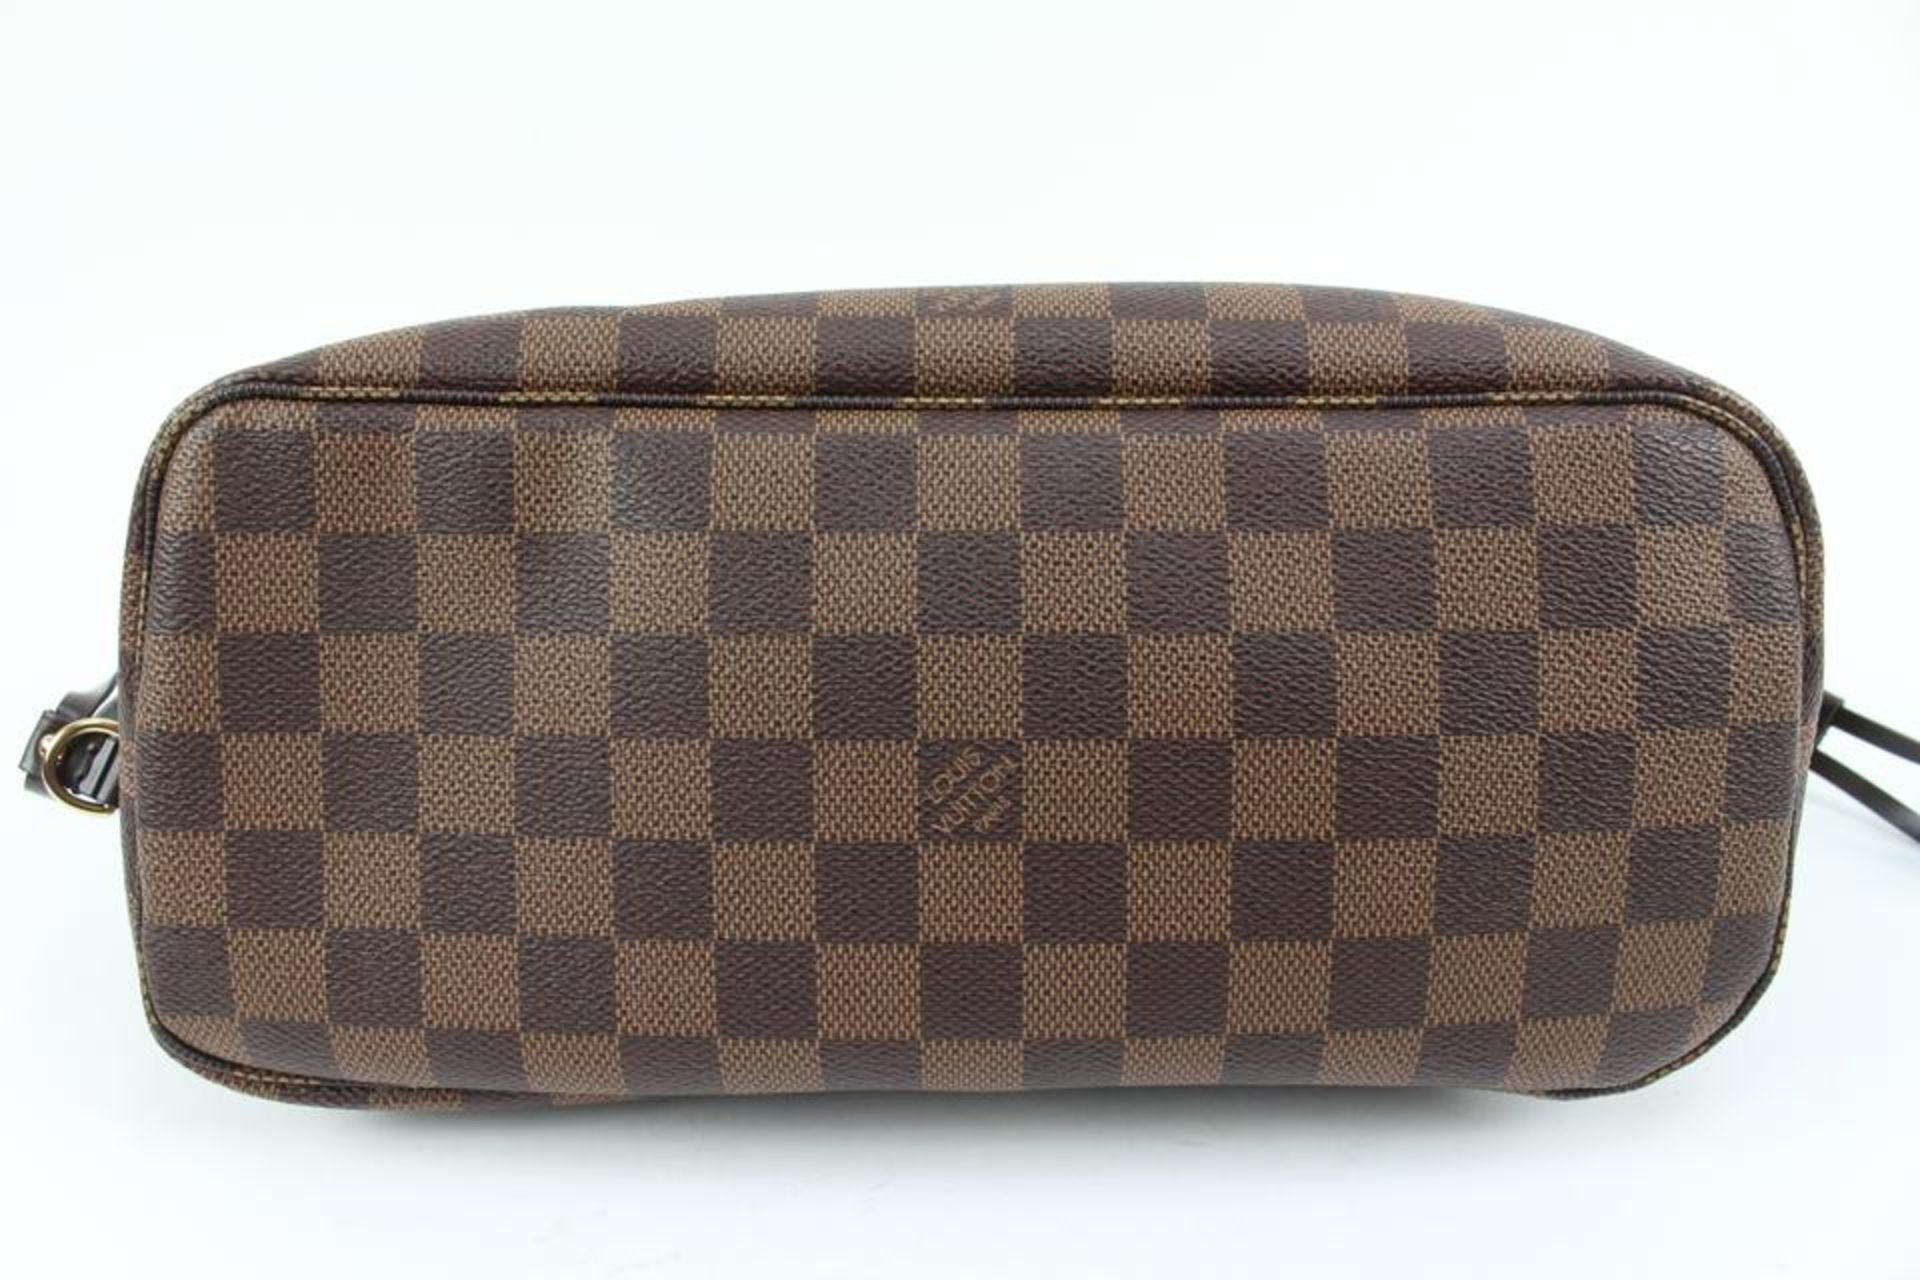 LOUIS VUITTON SMALL DAMIER EBENE NEVERFULL PM TOTE - Image 6 of 14